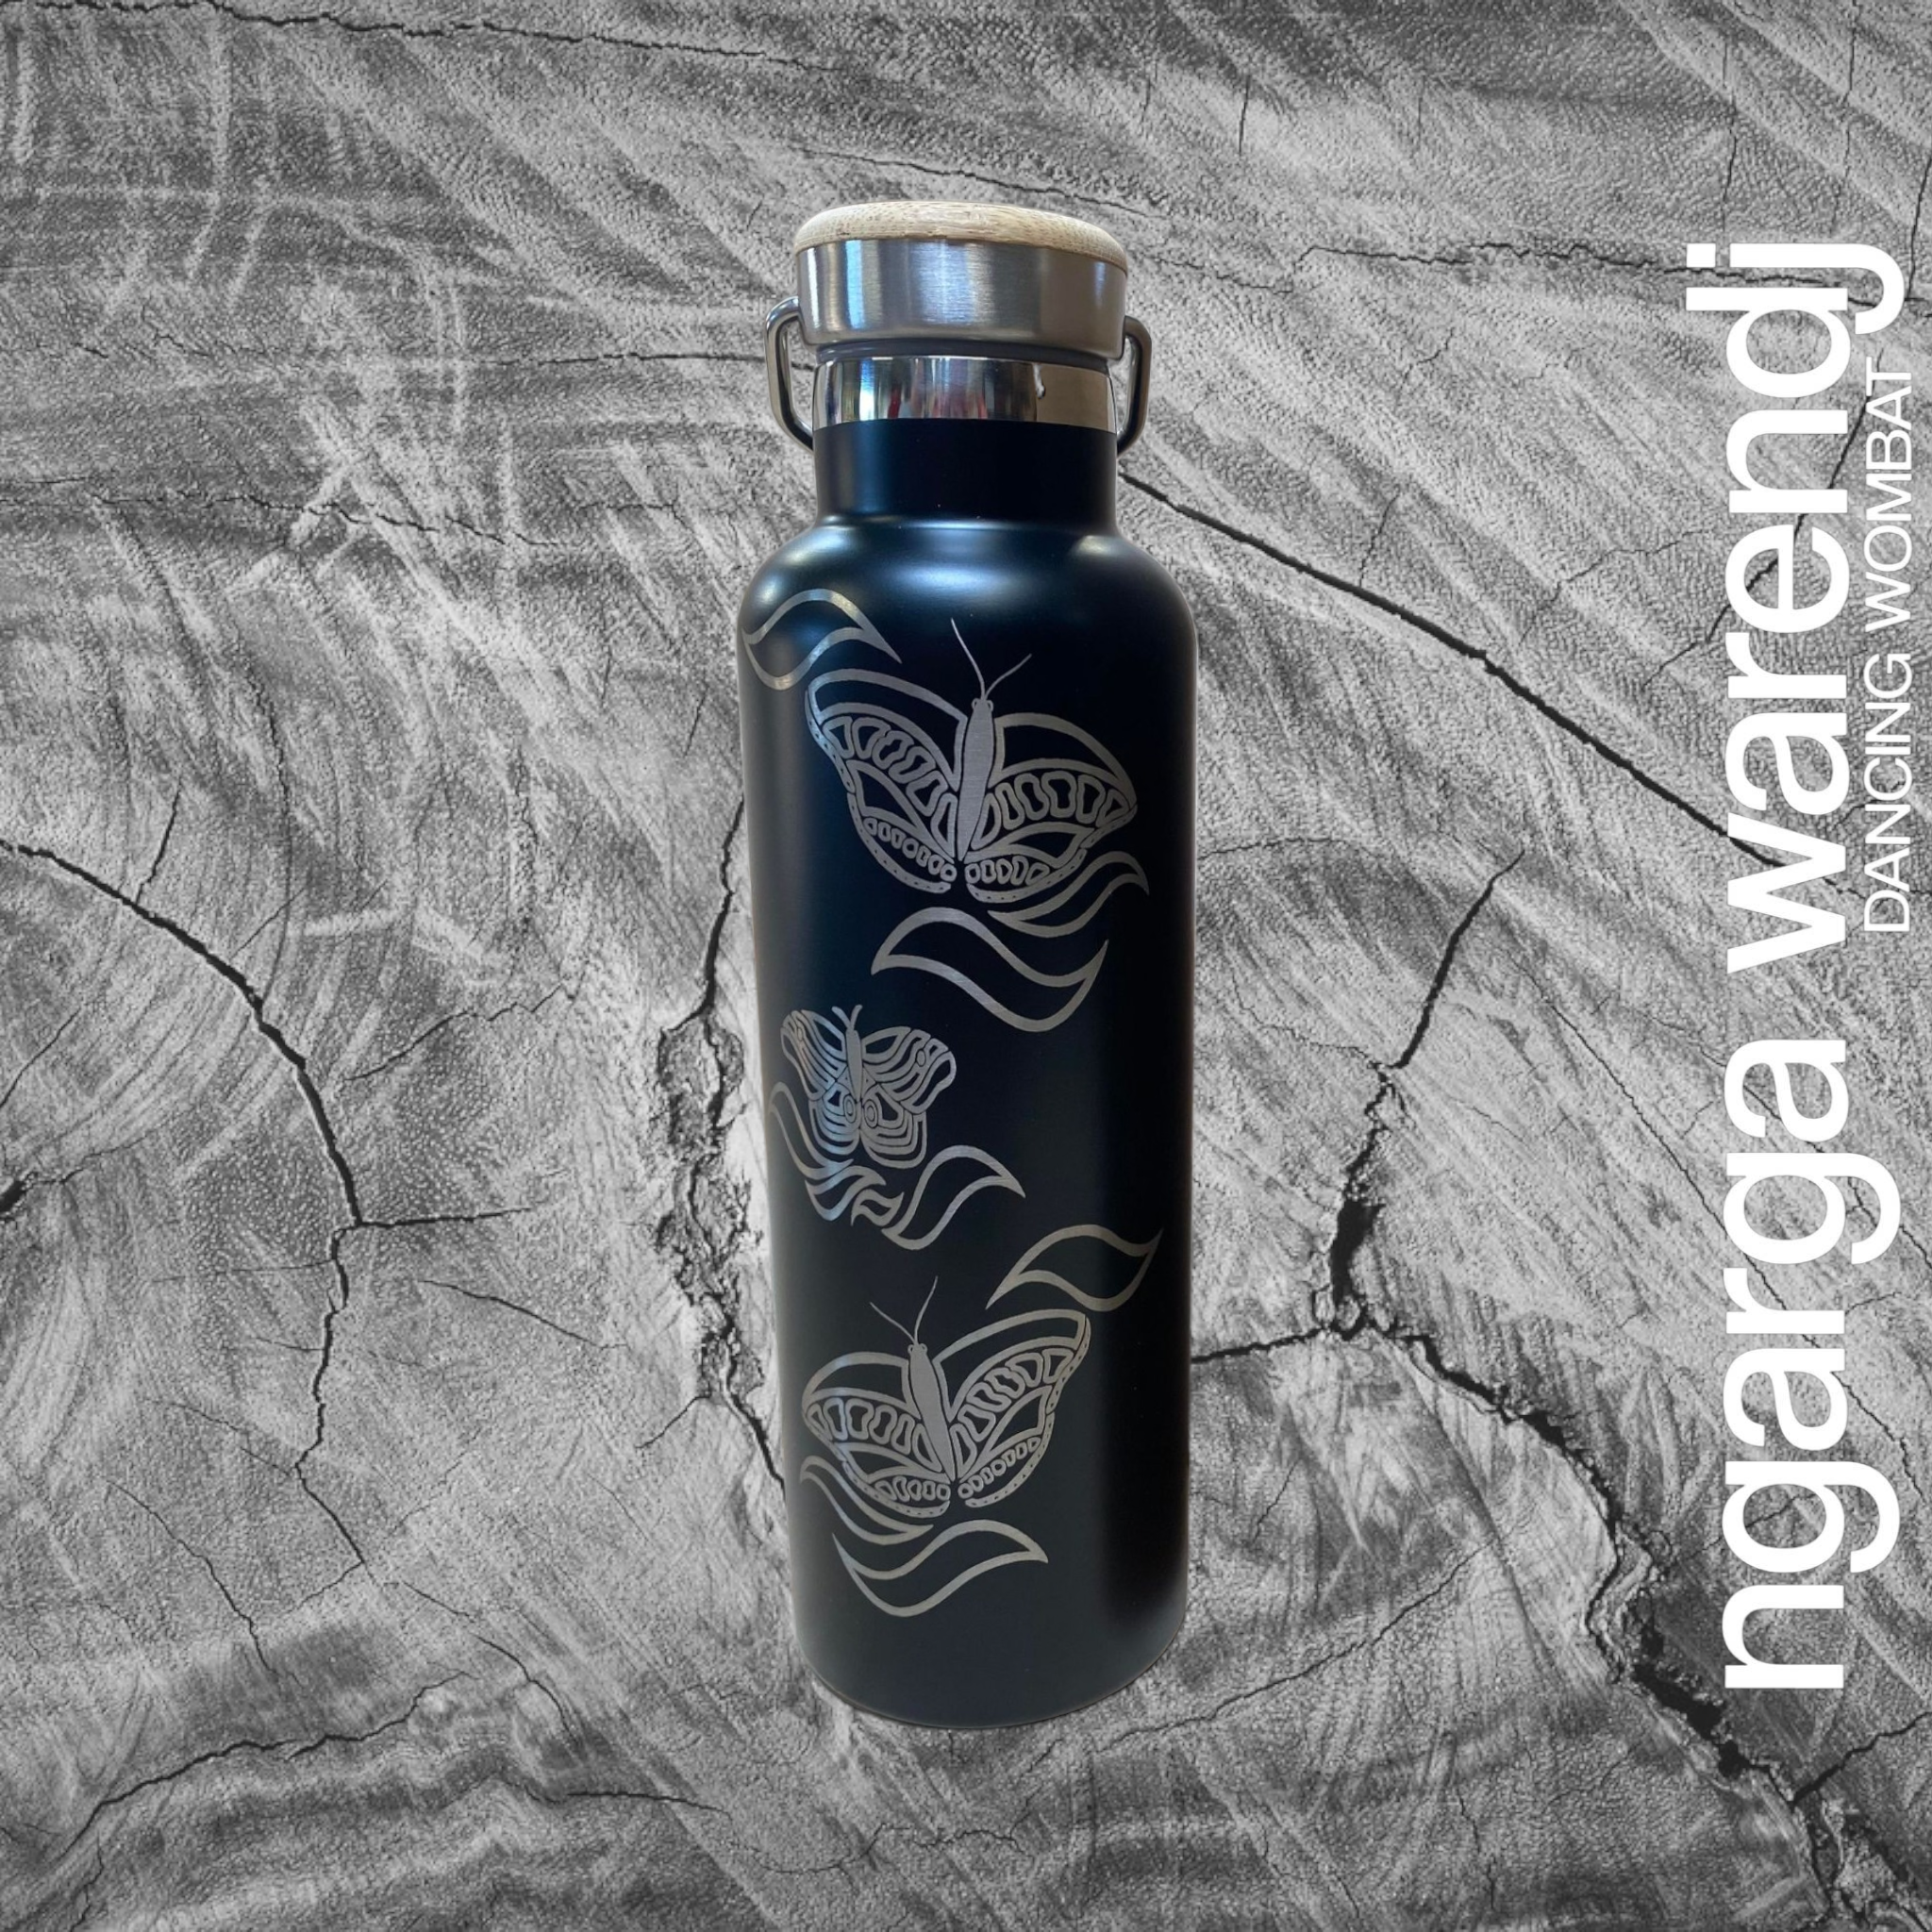 BALAM BALAM BUTTERFLIES DESIGN - BLACK  OR WHITE 750ML DOUBLE WALLED INSULATED STAINLESS STEEL BOTTLE